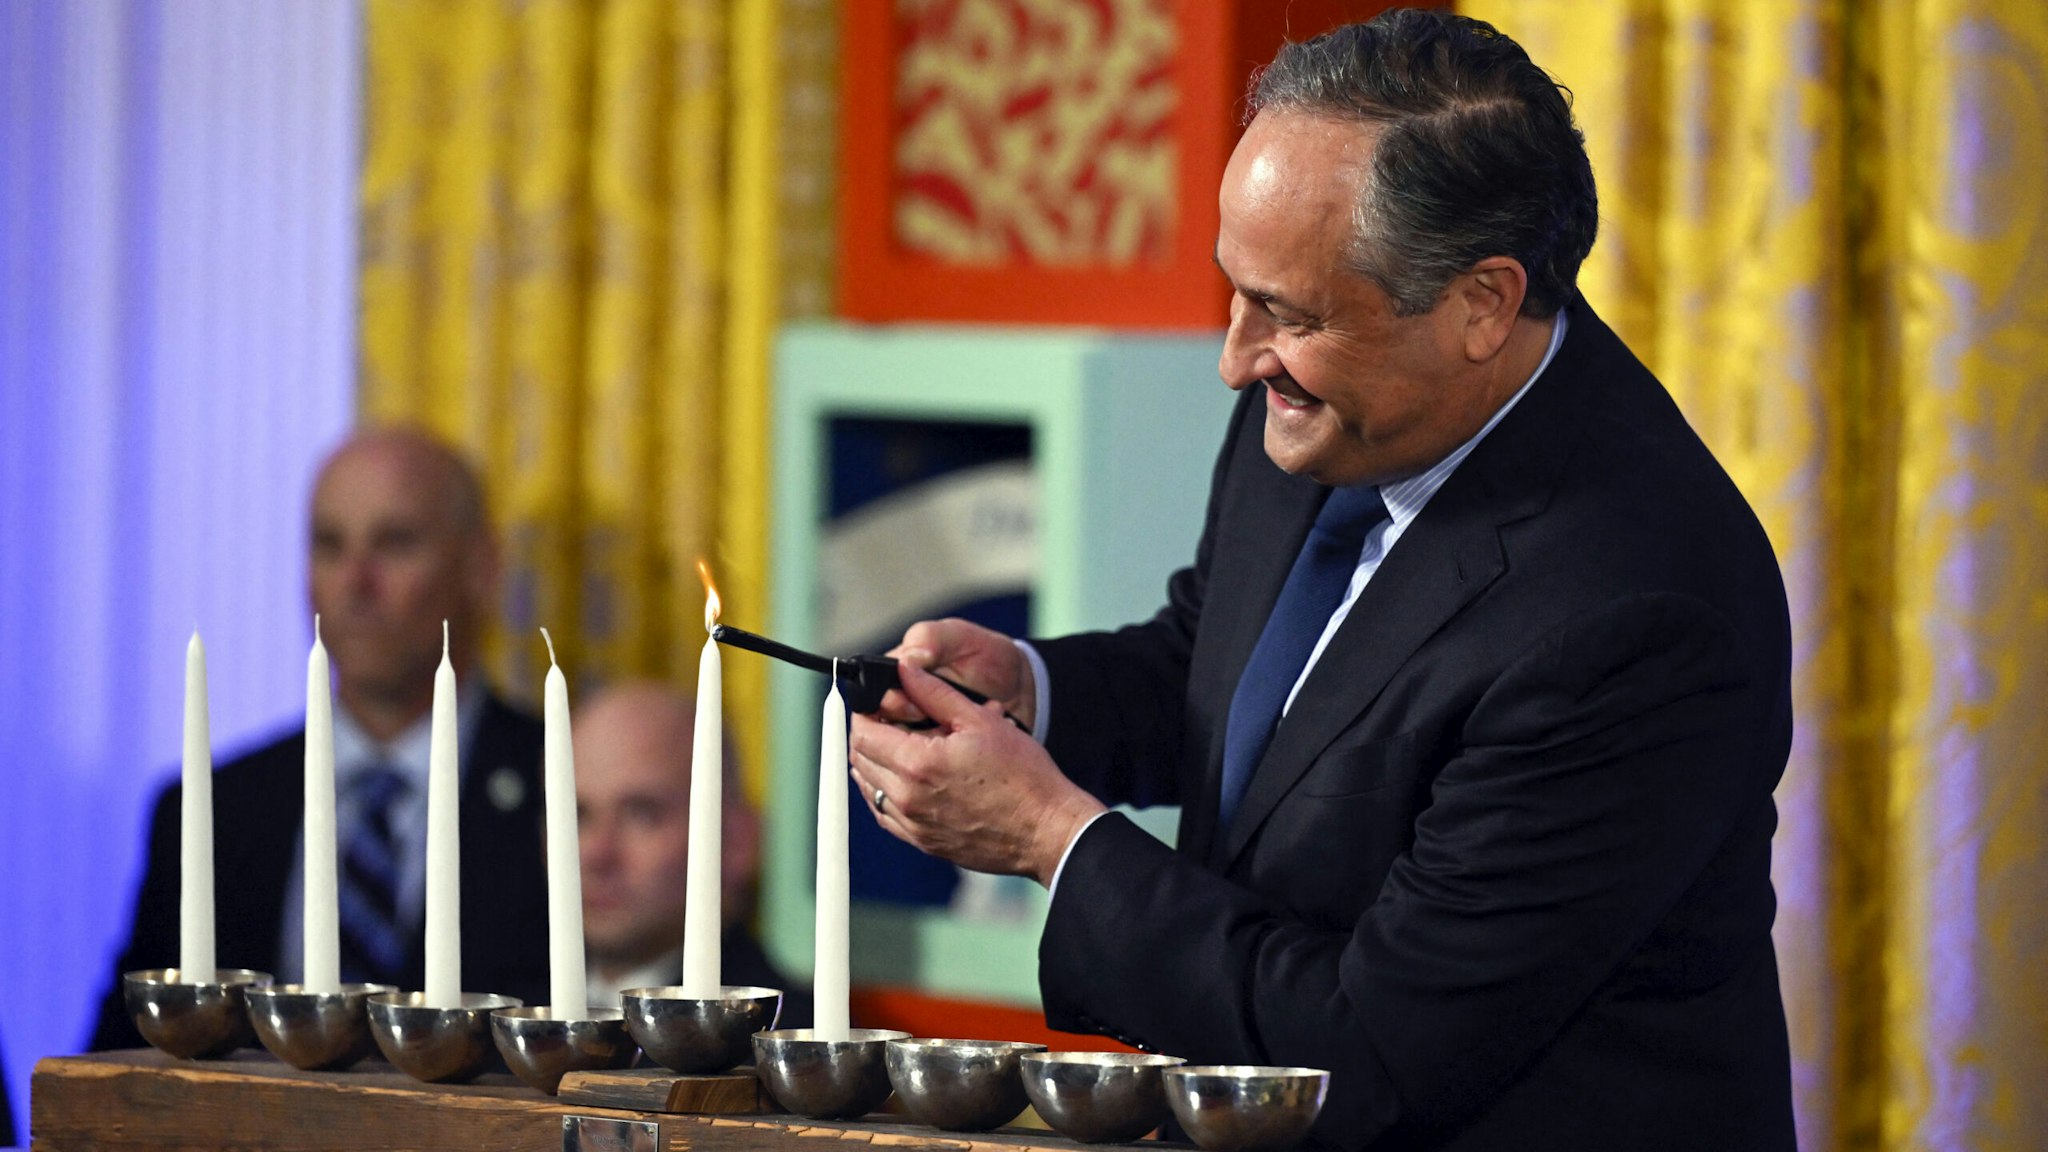 US Second Gentleman Doug Emhoff lights the first flame on a Menorah candle during a Hanukkah reception in the East Room of the White House in Washington, DC, on December 11, 2023.